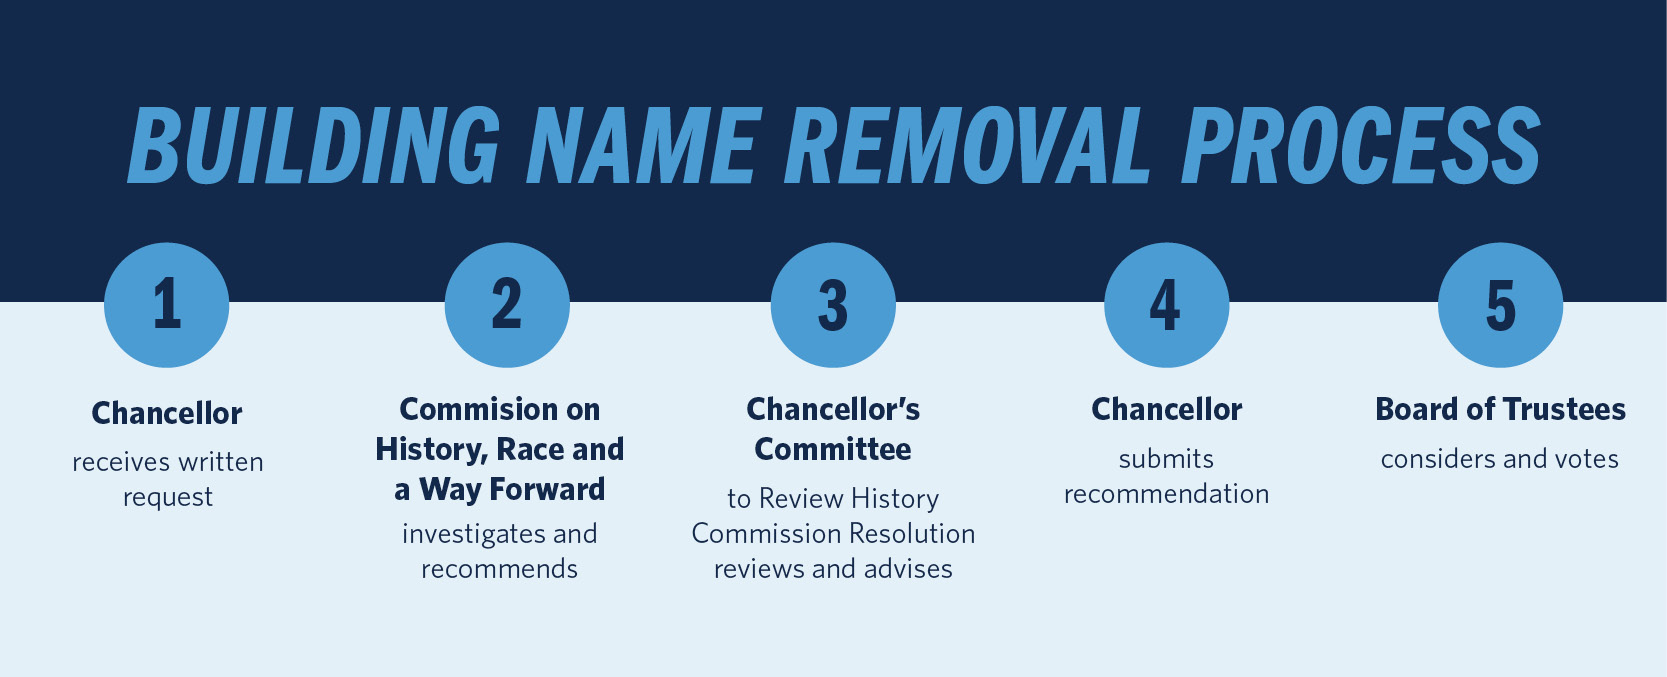 BUILDING NAME REMOVAL PROCESS 1. Chancellor receives written request 2. Commission on History, Race and a Way Forward Investigates and recommends 3. Chancellor’s Committee to Review History Commission Resolution reviews and advises 4. Chancellor submits recommendation 5. Board of Trustees considers and votes